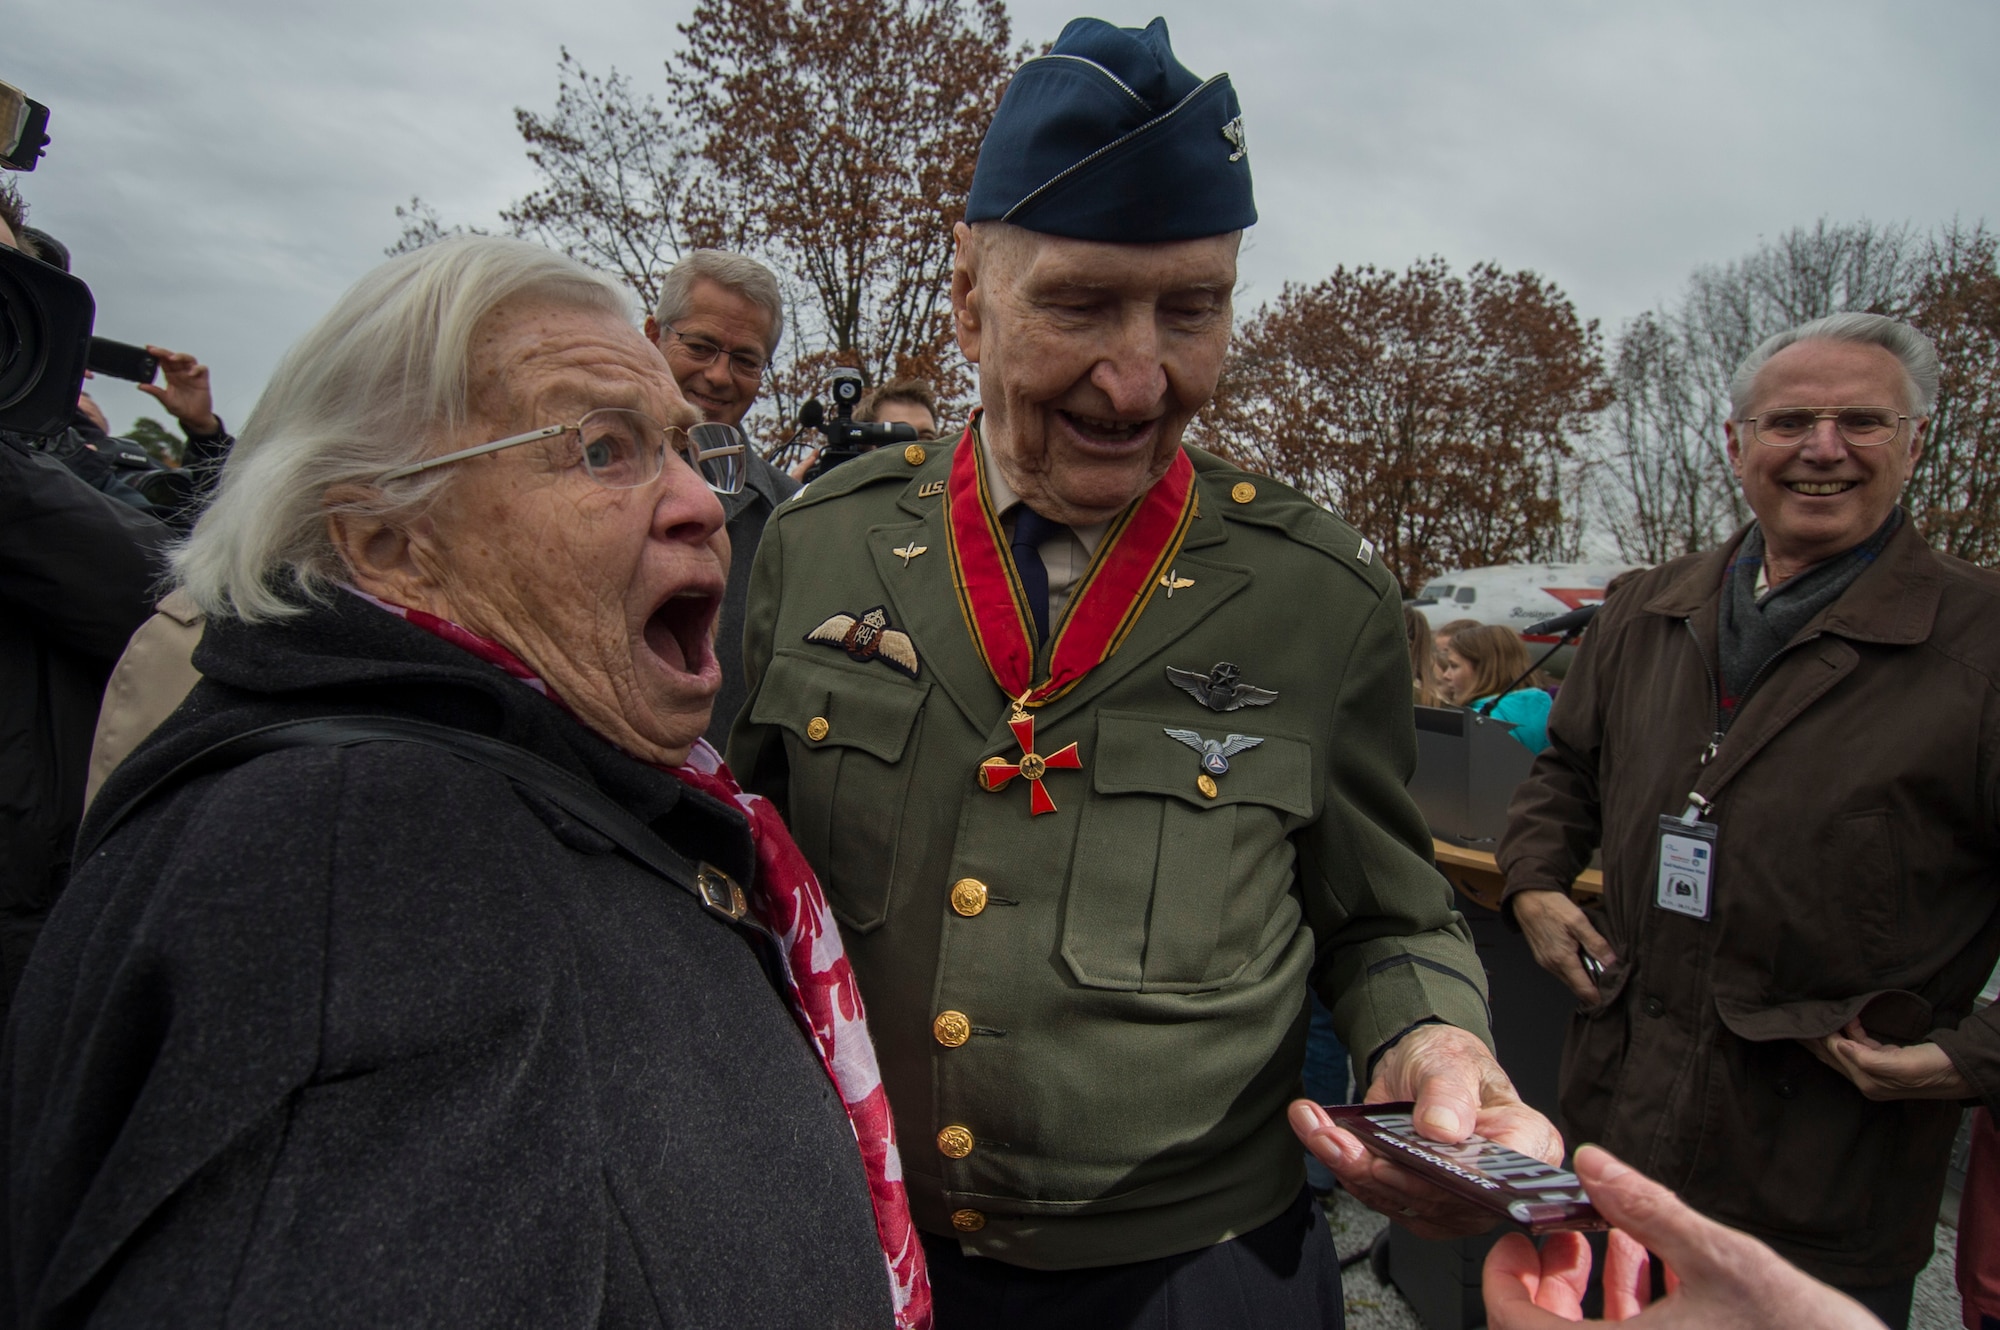 Retired U.S. Air Force Col. Gail Halvorsen, a C-52 Skymaster pilot also known as the Candy Bomber, prepares to present a chocolate bar to Gisela Rainare, a former civilian employee at the former Frankfurt an Main Air Base, Germany, before the reopening ceremony of the Berlin Airlift Memorial outside Frankfurt International Airport, Germany, Nov. 22, 2016. Halvorsen and his fellow pilots dropped 23 tons of candy with makeshift parachutes from his C-54 as part of the Berlin Airlift, which delivered more than two million tons of food to the blockaded citizens of West Berlin between June 1948 and September 1949. (U.S. Air Force photo by Staff Sgt. Joe W. McFadden)